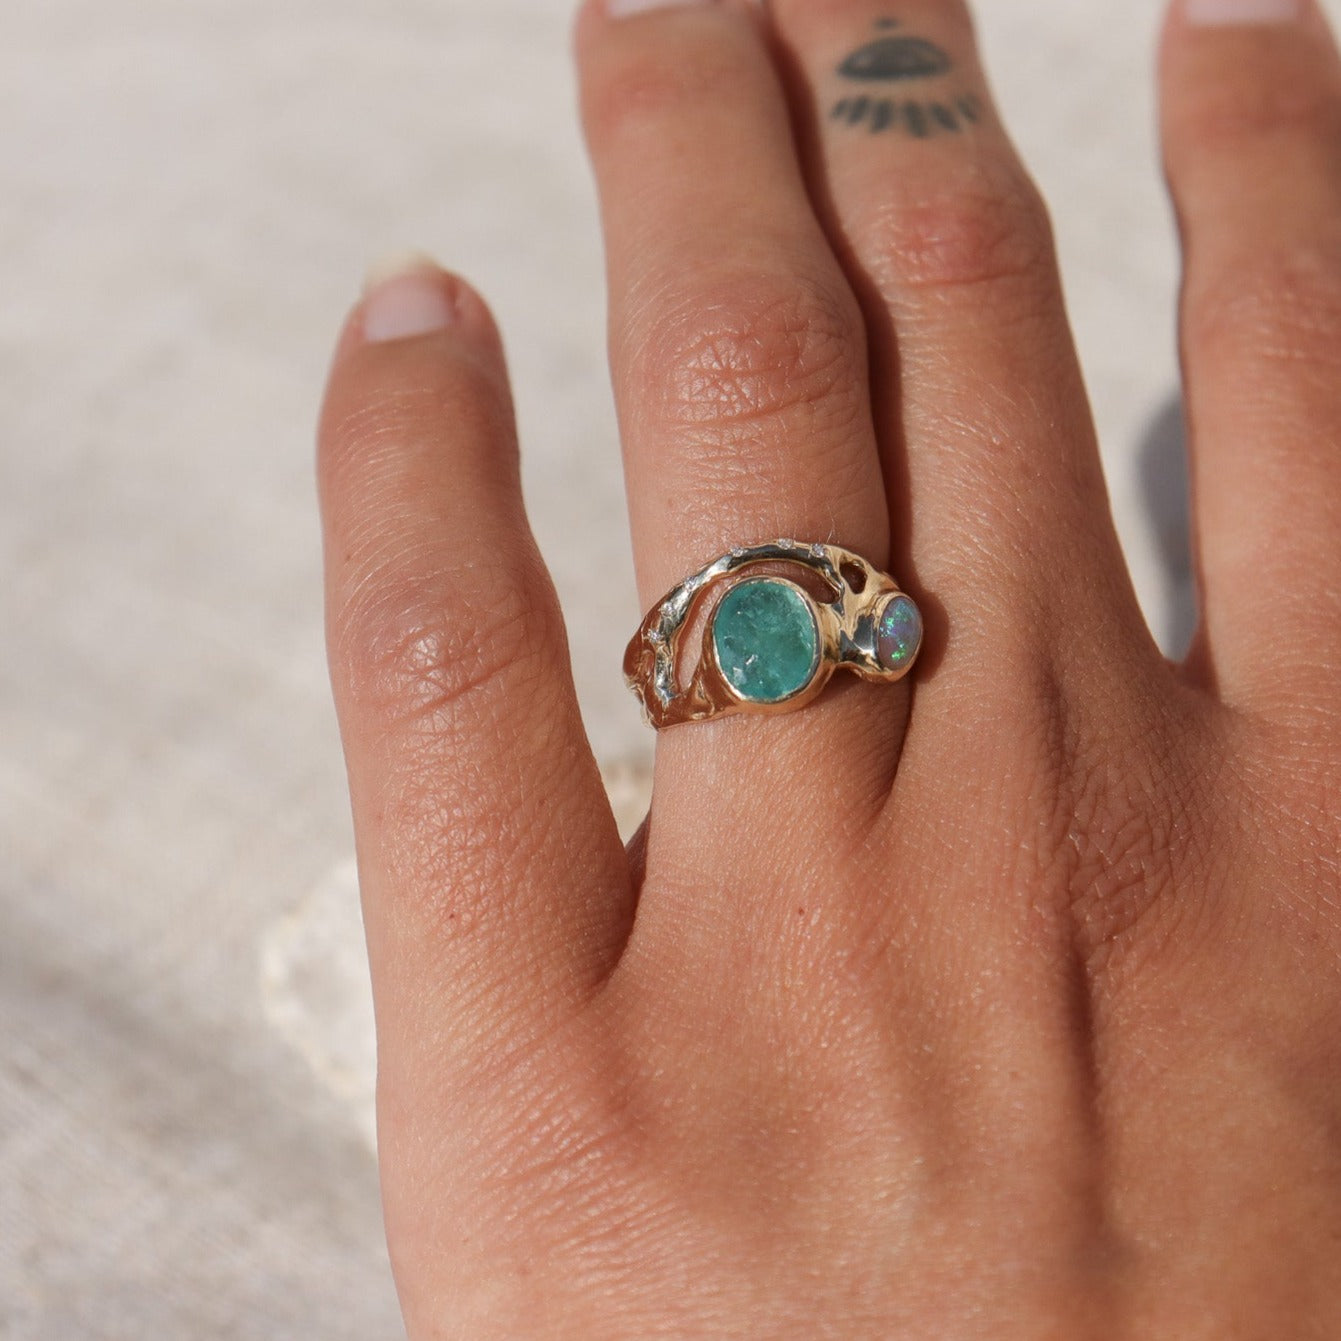 Organically shaped ring with a stunning Paraiba tourmaline and opal, bezel-set and accented with dazzling diamonds.